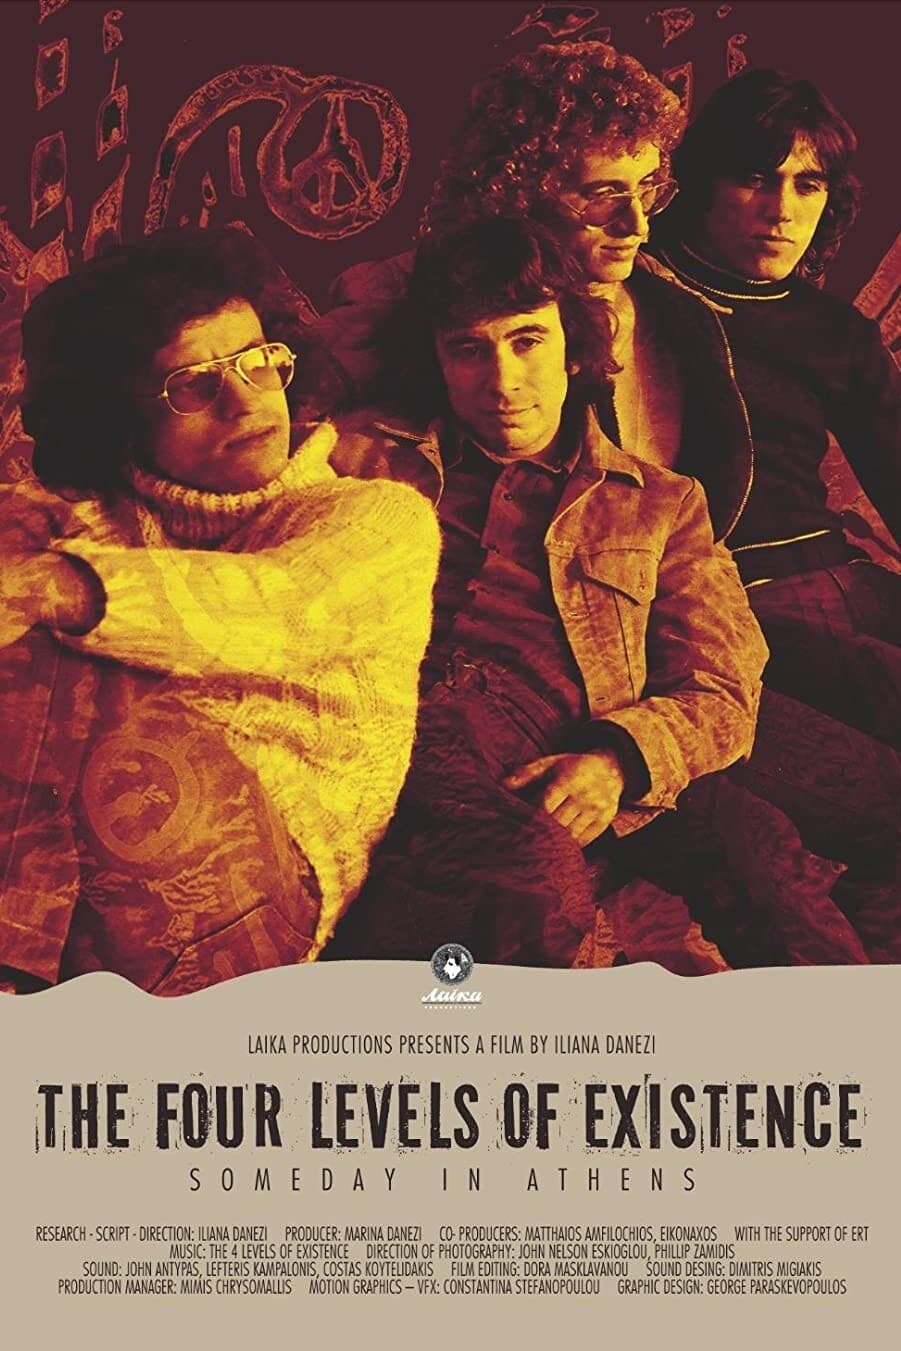 The Four Levels of Existence